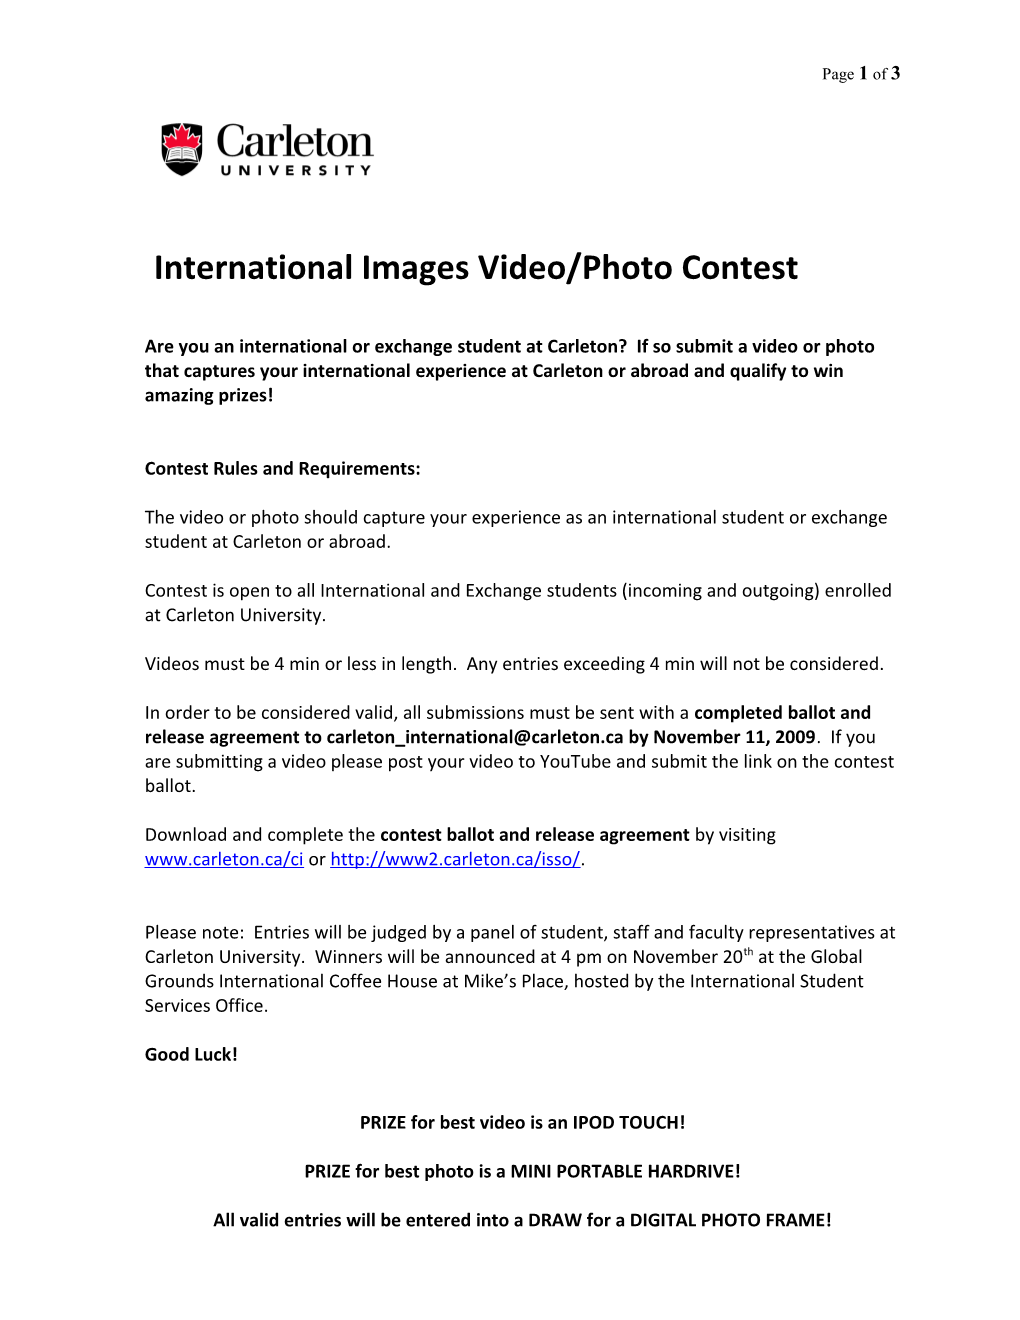 International Images Video/Photo Contest